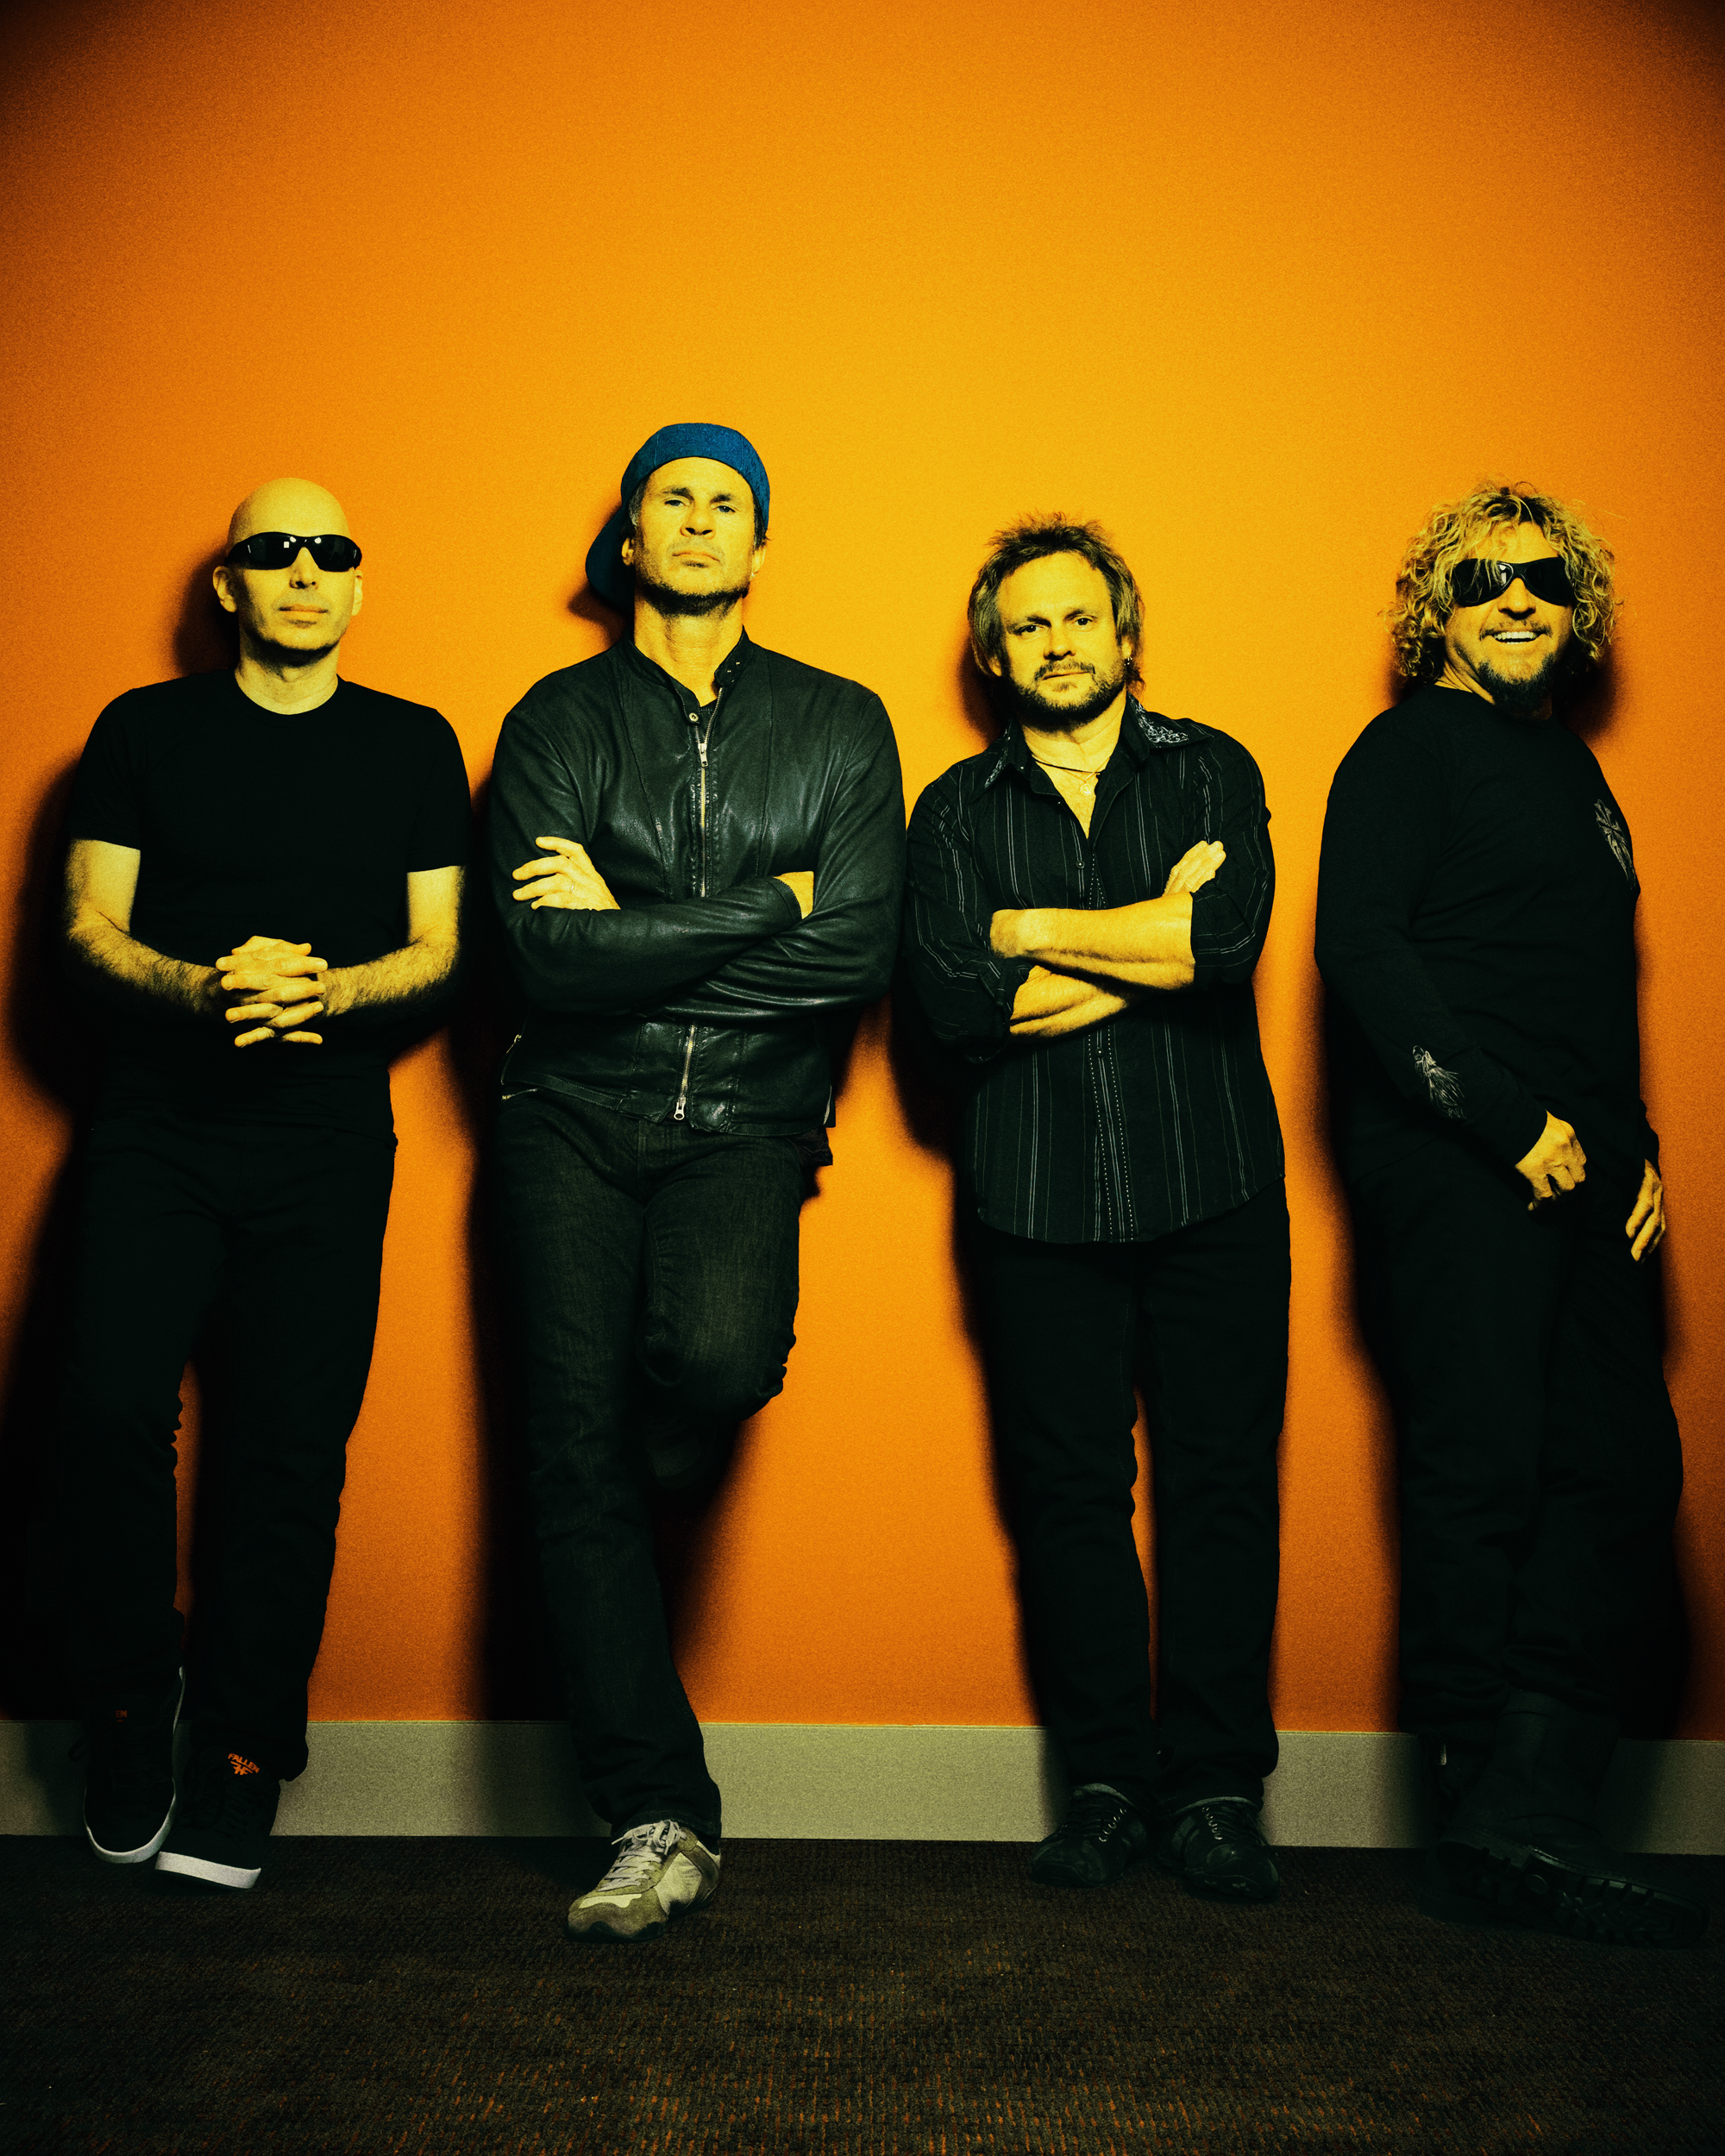 Chickenfoot Images